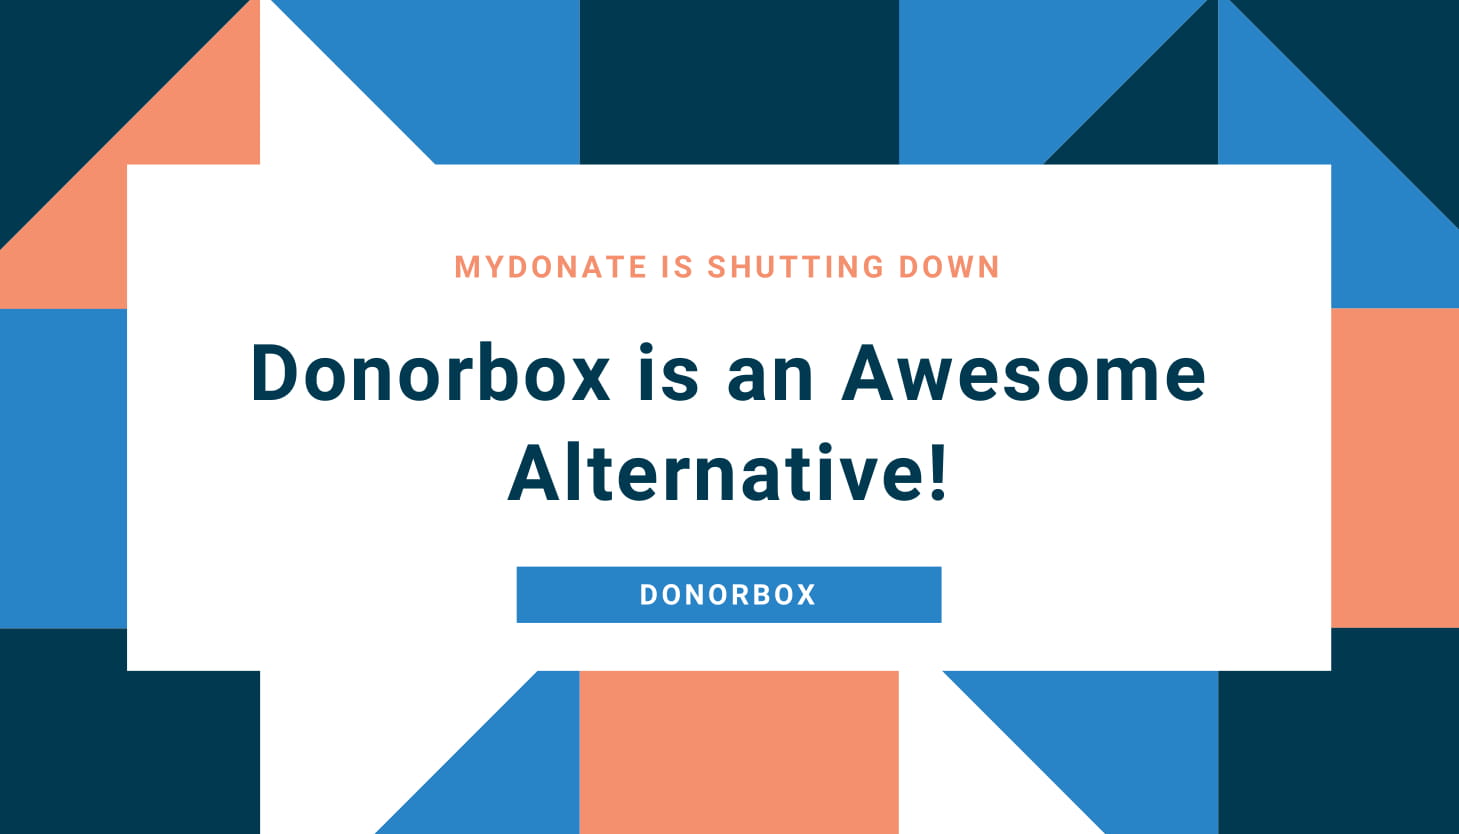 MyDonate is shutting down. Here’s an awesome alternative!